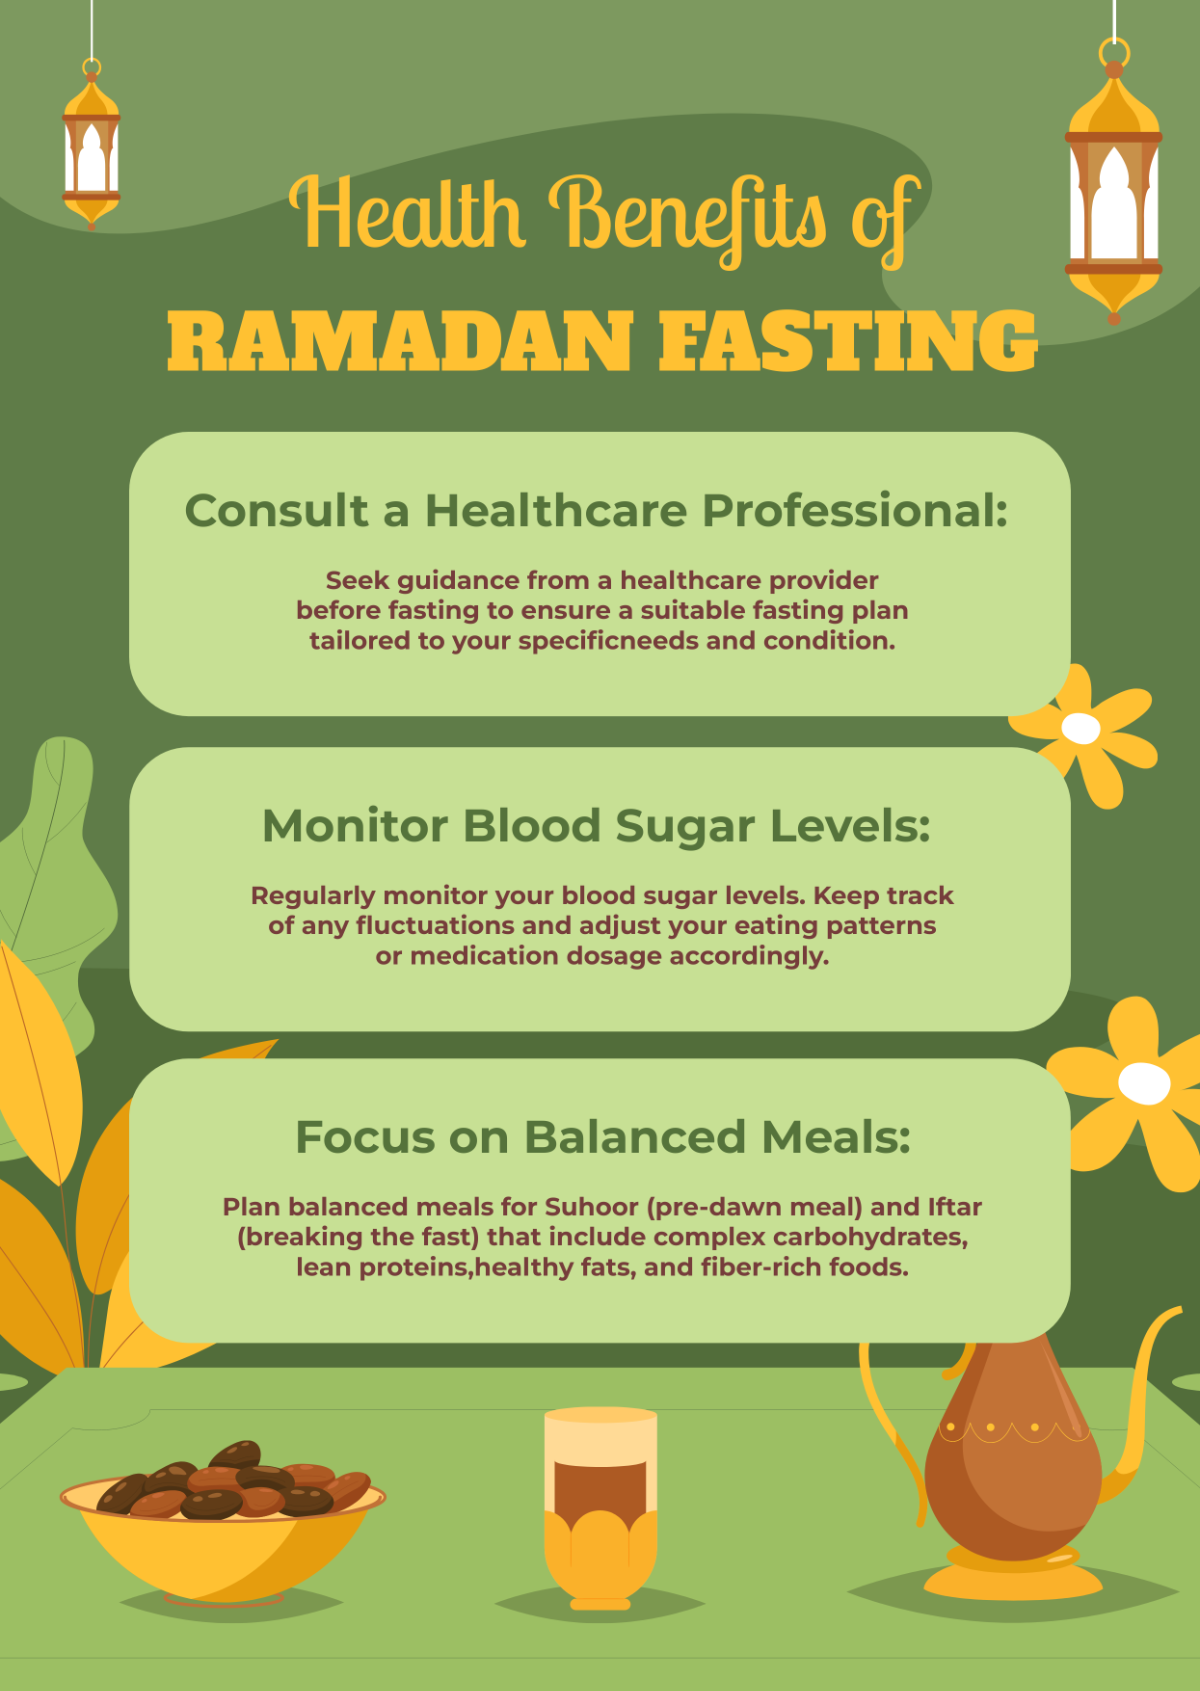 Tips for Diabetic People Fasting During Ramadan